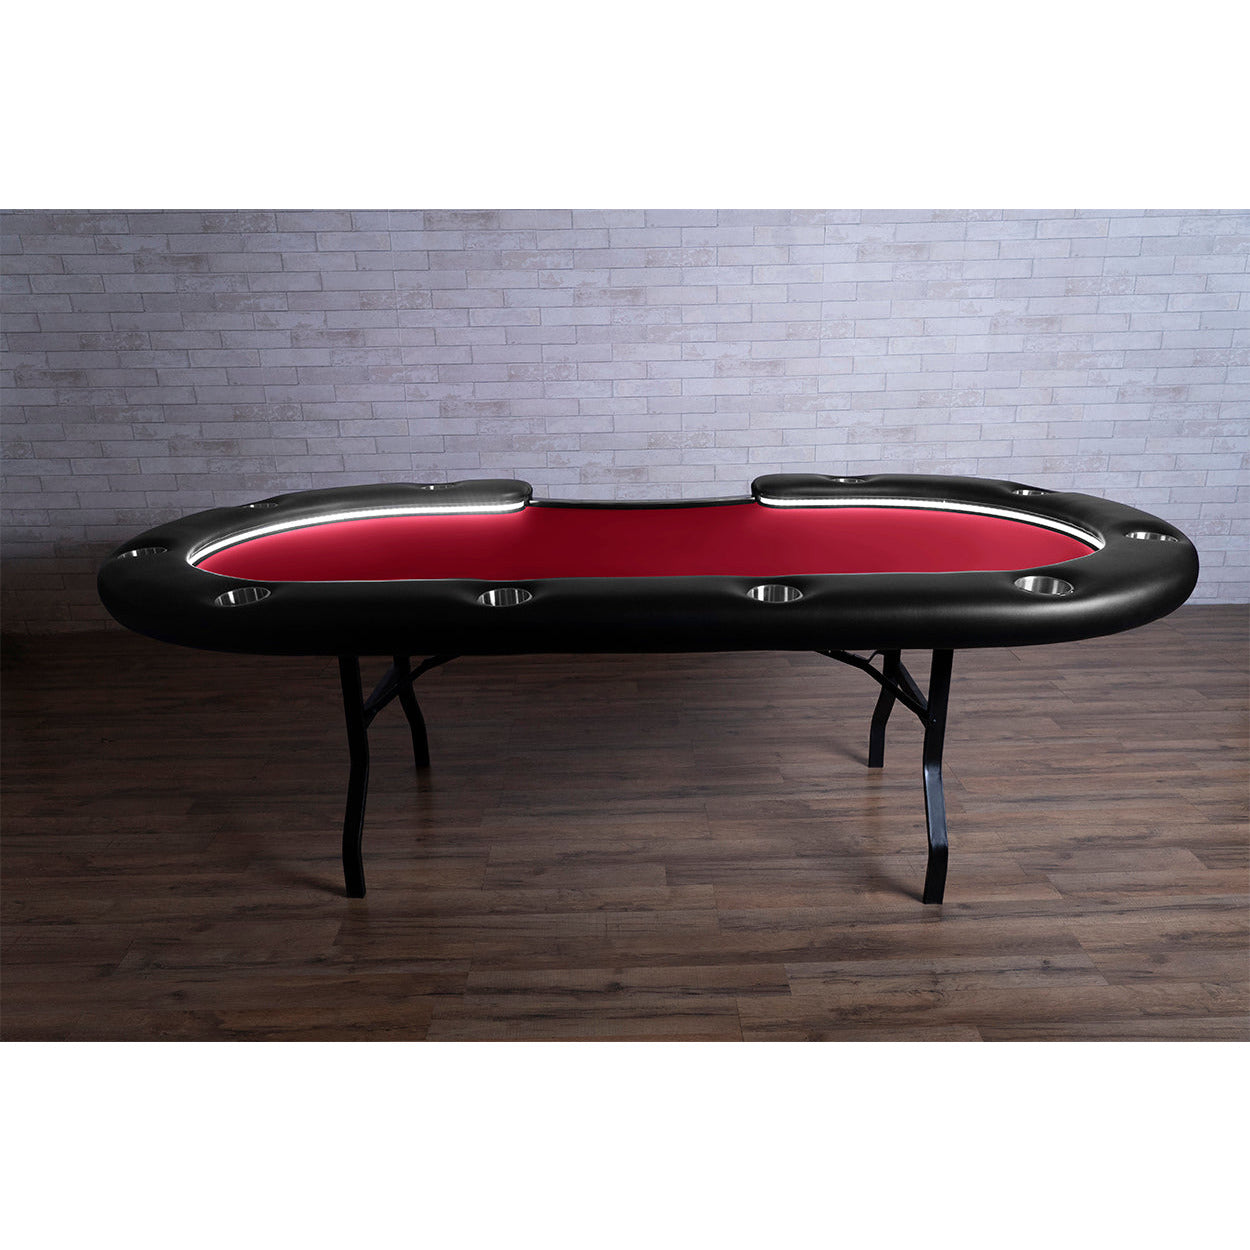 BBO The Aces Pro Alpha Folding Poker Table red side view 